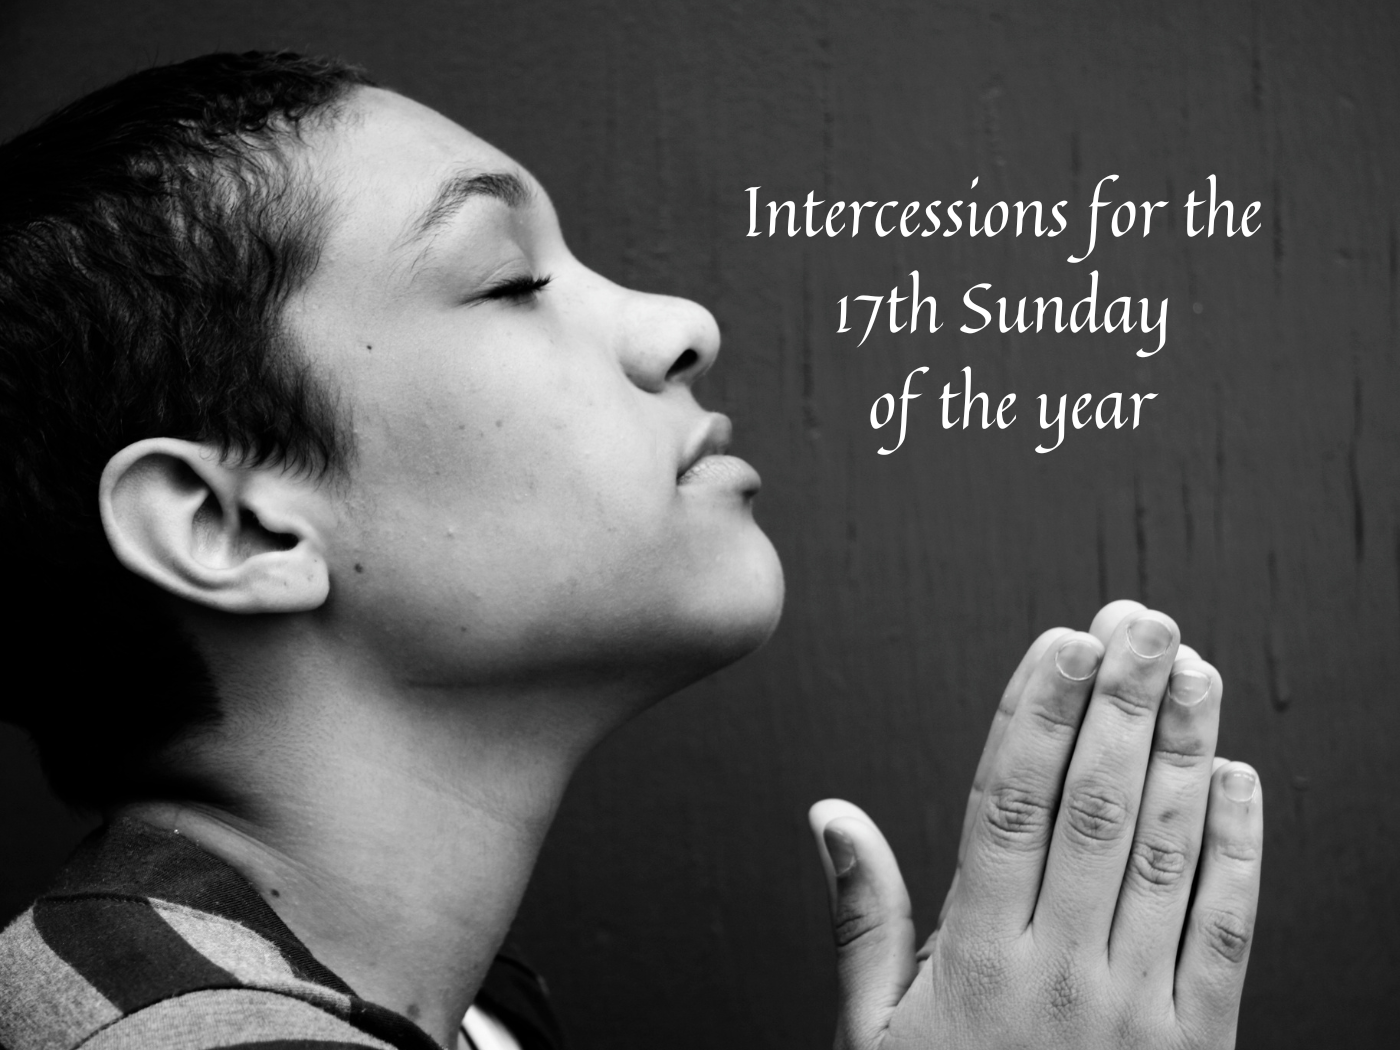 Download prayers of intercession for the 17th Sunday of the year